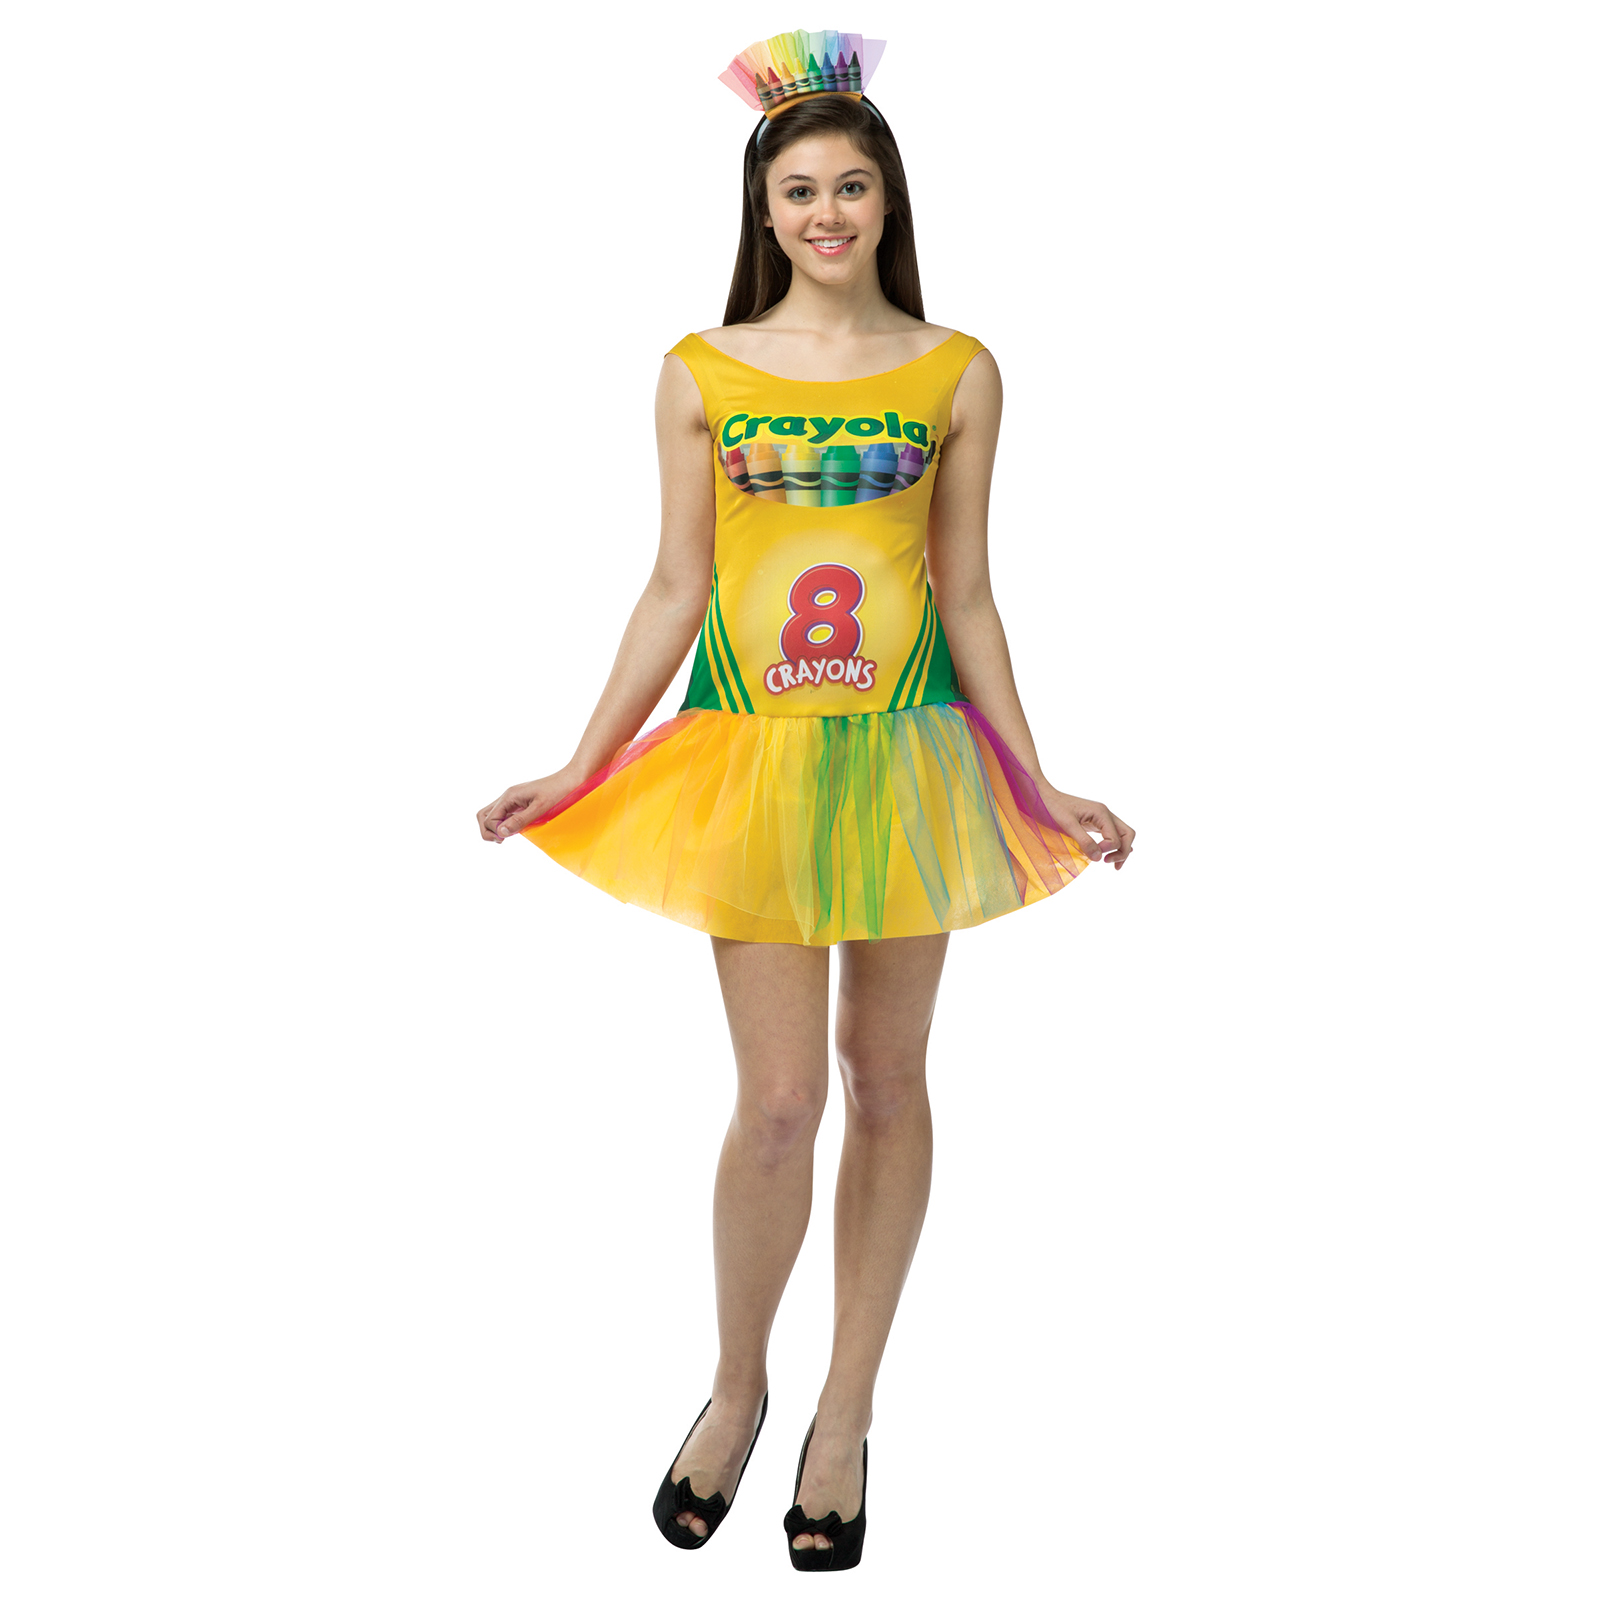 Cry Crayon Box Dress Teen Size: One Size Fits Most